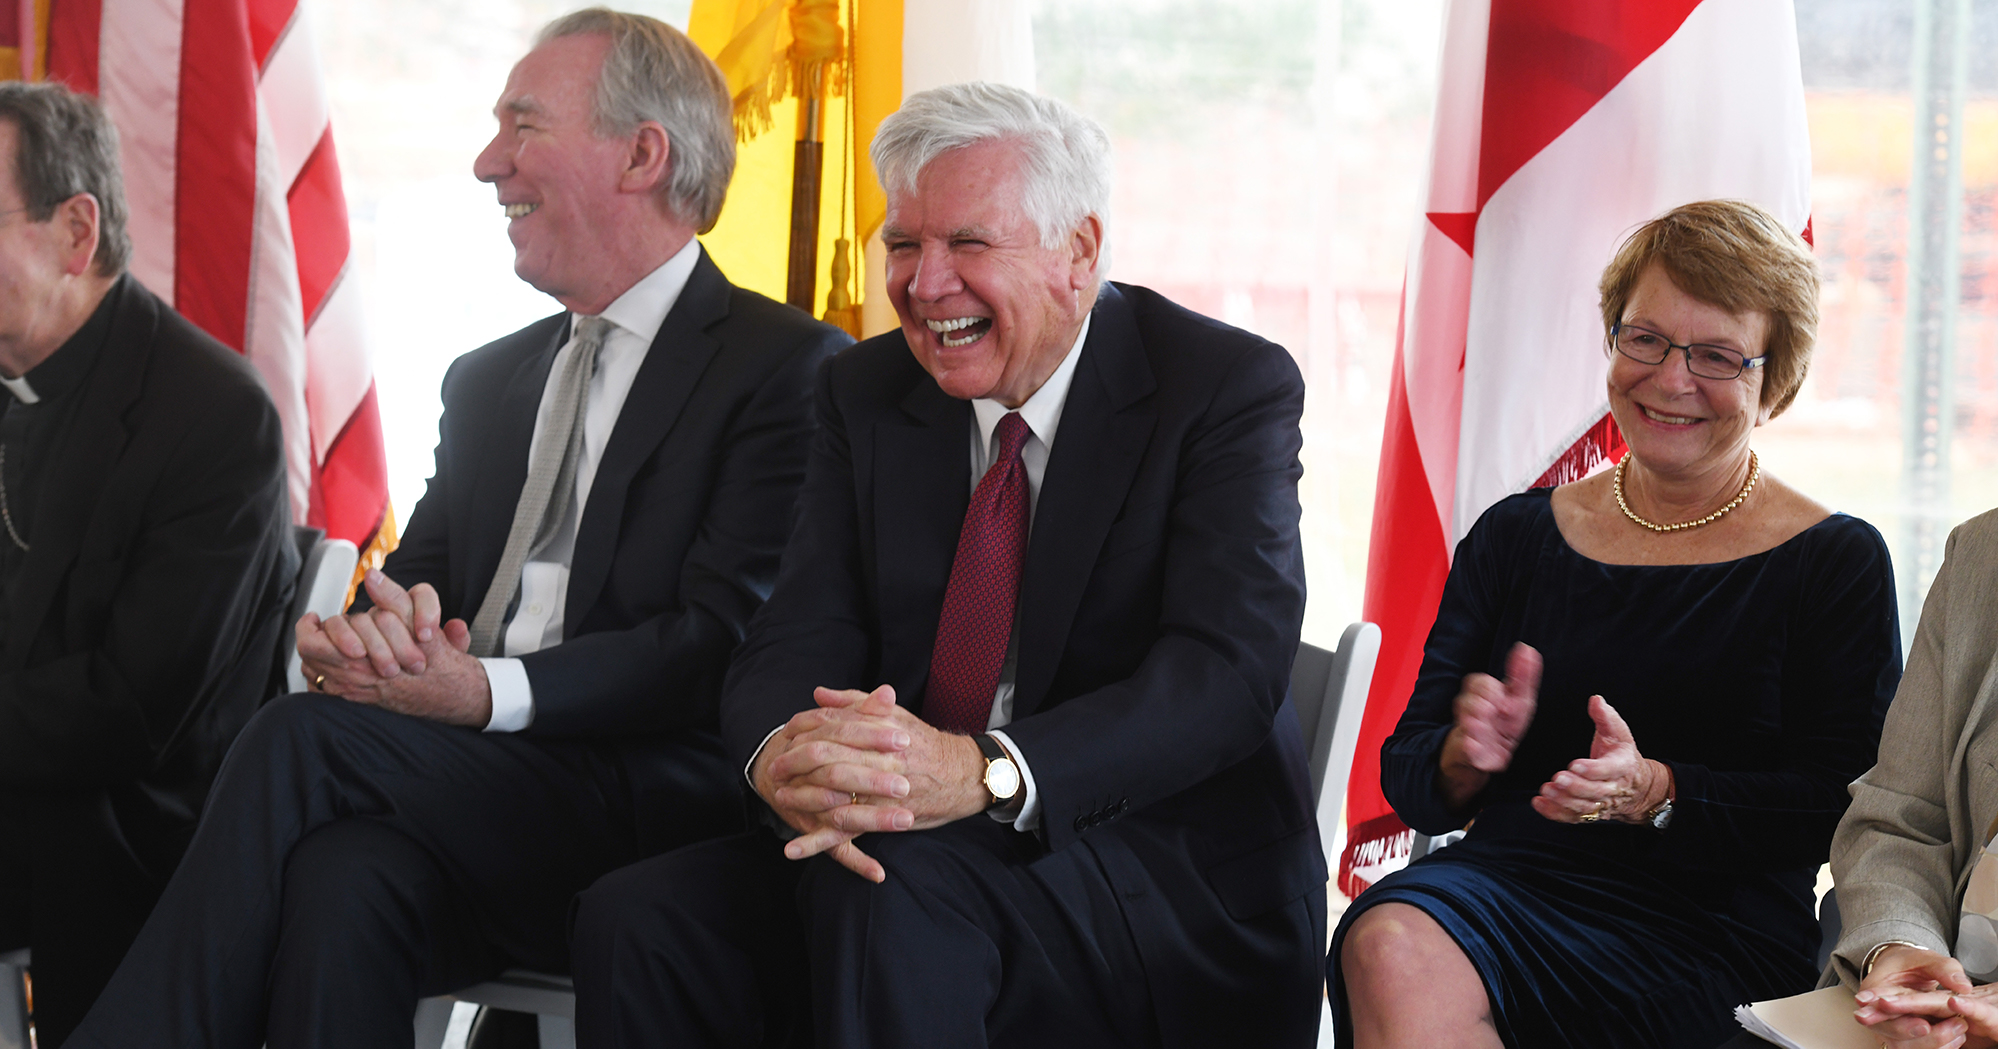 Bill Conway laughs, with President Garvey and Dean Emerita McMullen by his side